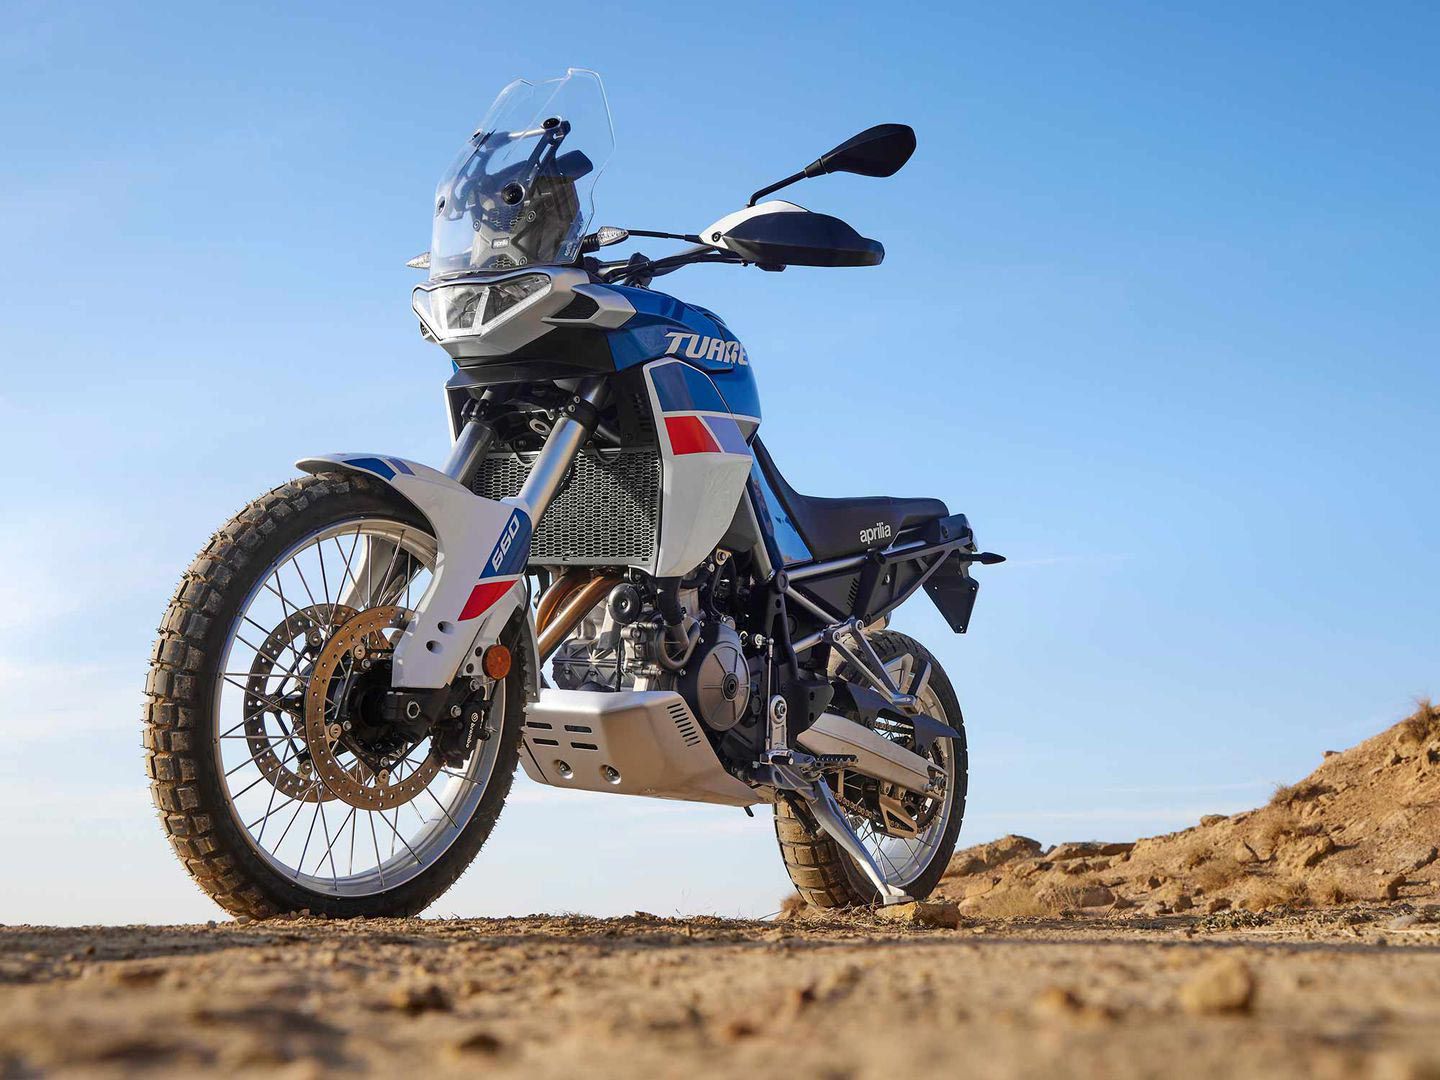 With the Tuareg 660, Aprilia created a capable and competitive adventure bike for the dirt.